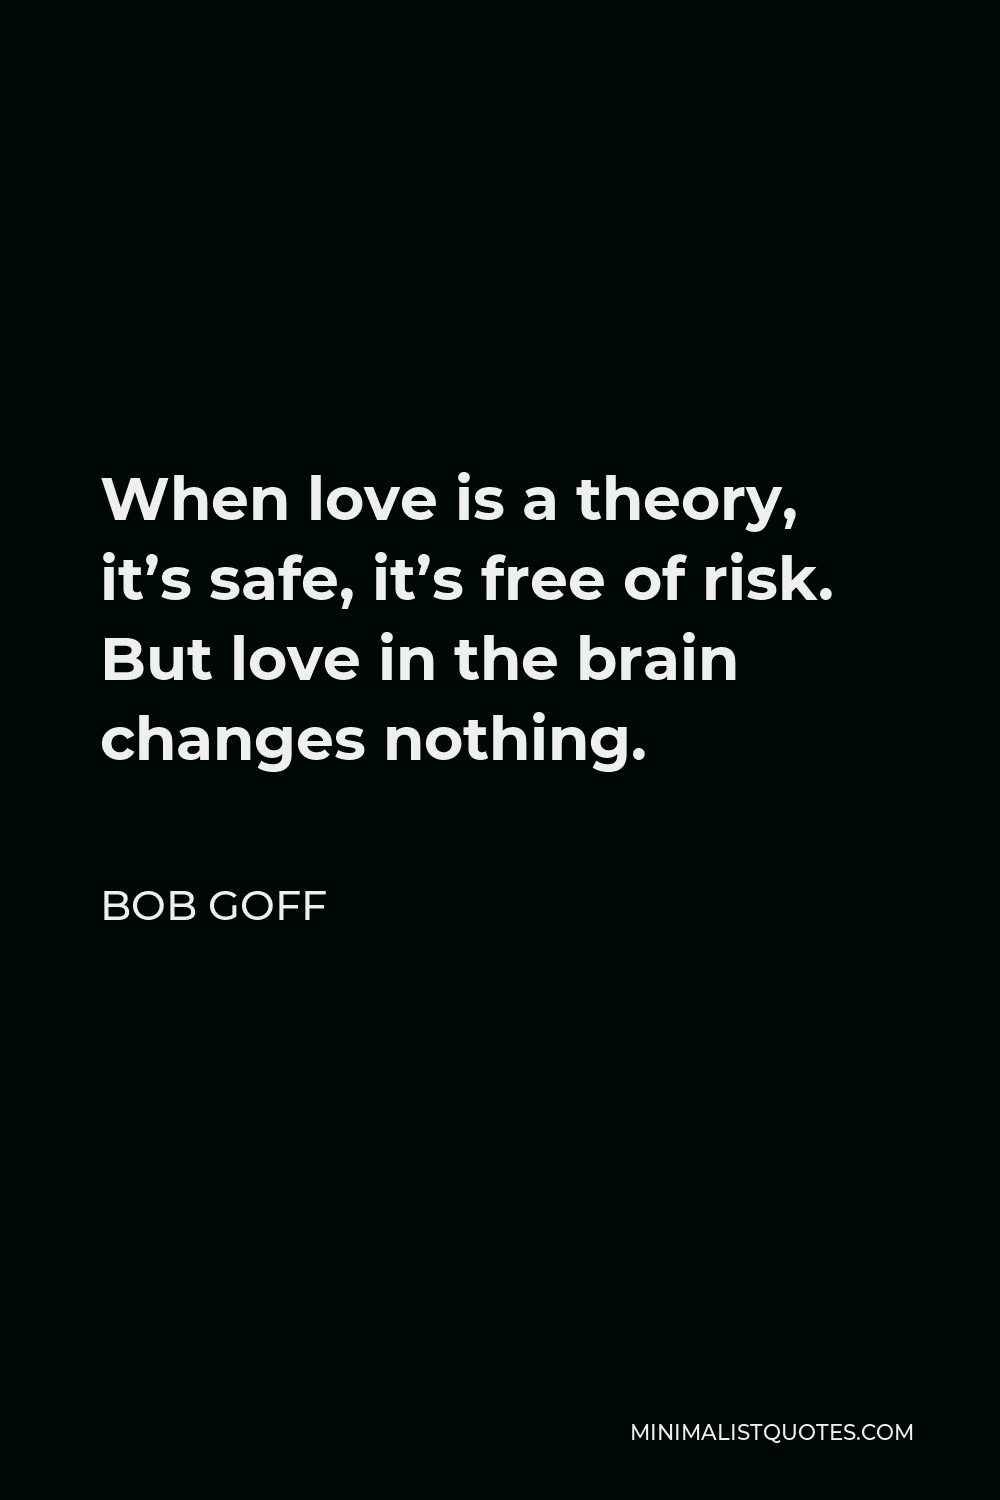 Bob Goff Quote - When love is a theory, it’s safe, it’s free of risk. But love in the brain changes nothing.